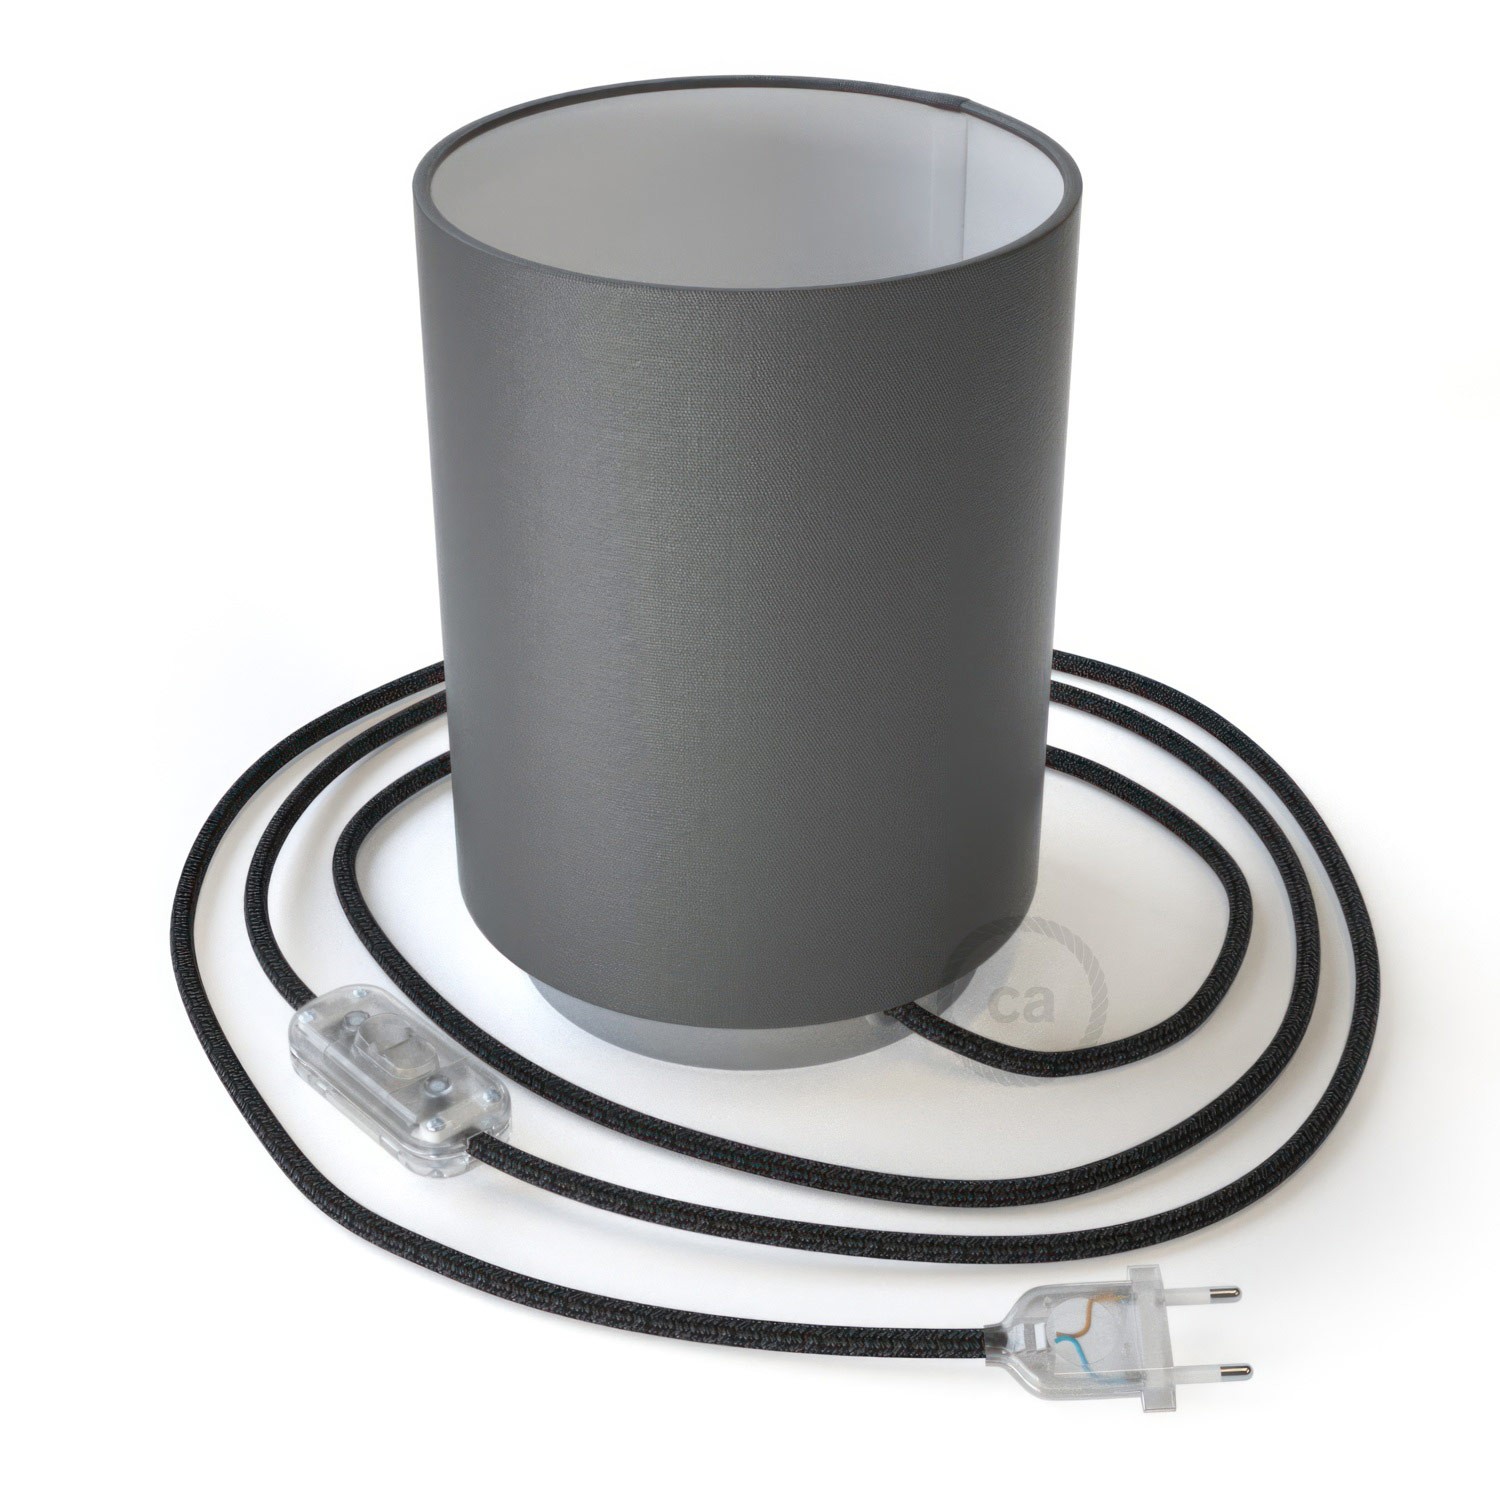 Posaluce in metal with Penguin Electra Cilindro lampshade, complete with fabric cable, switch and 2-pin plug